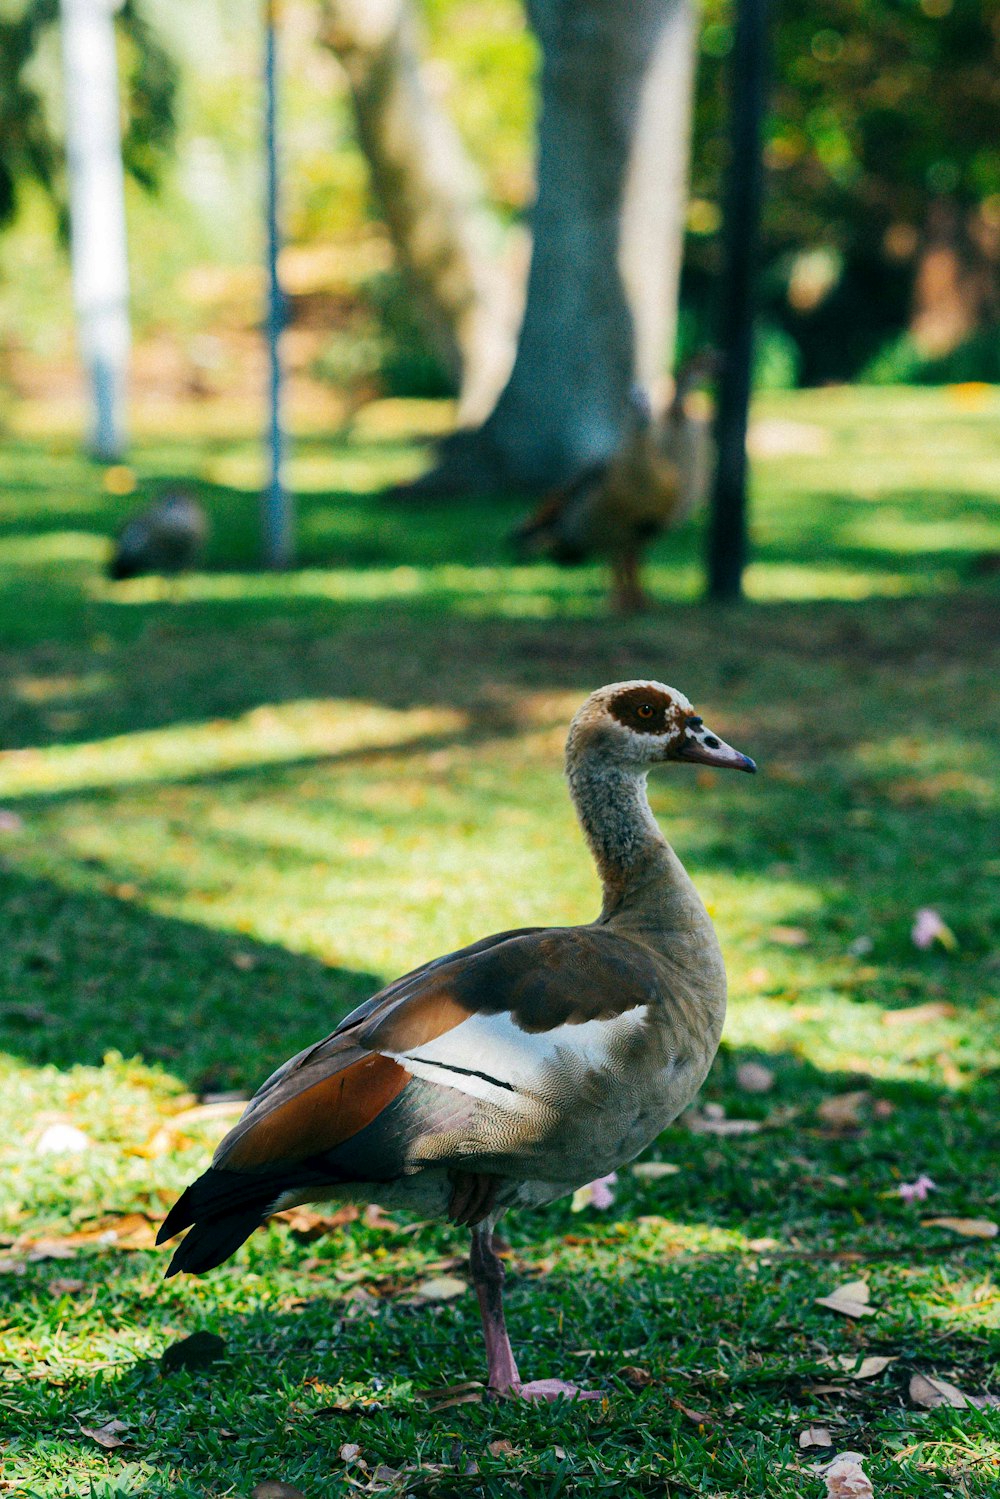 brown and white duck on green grass field during daytime